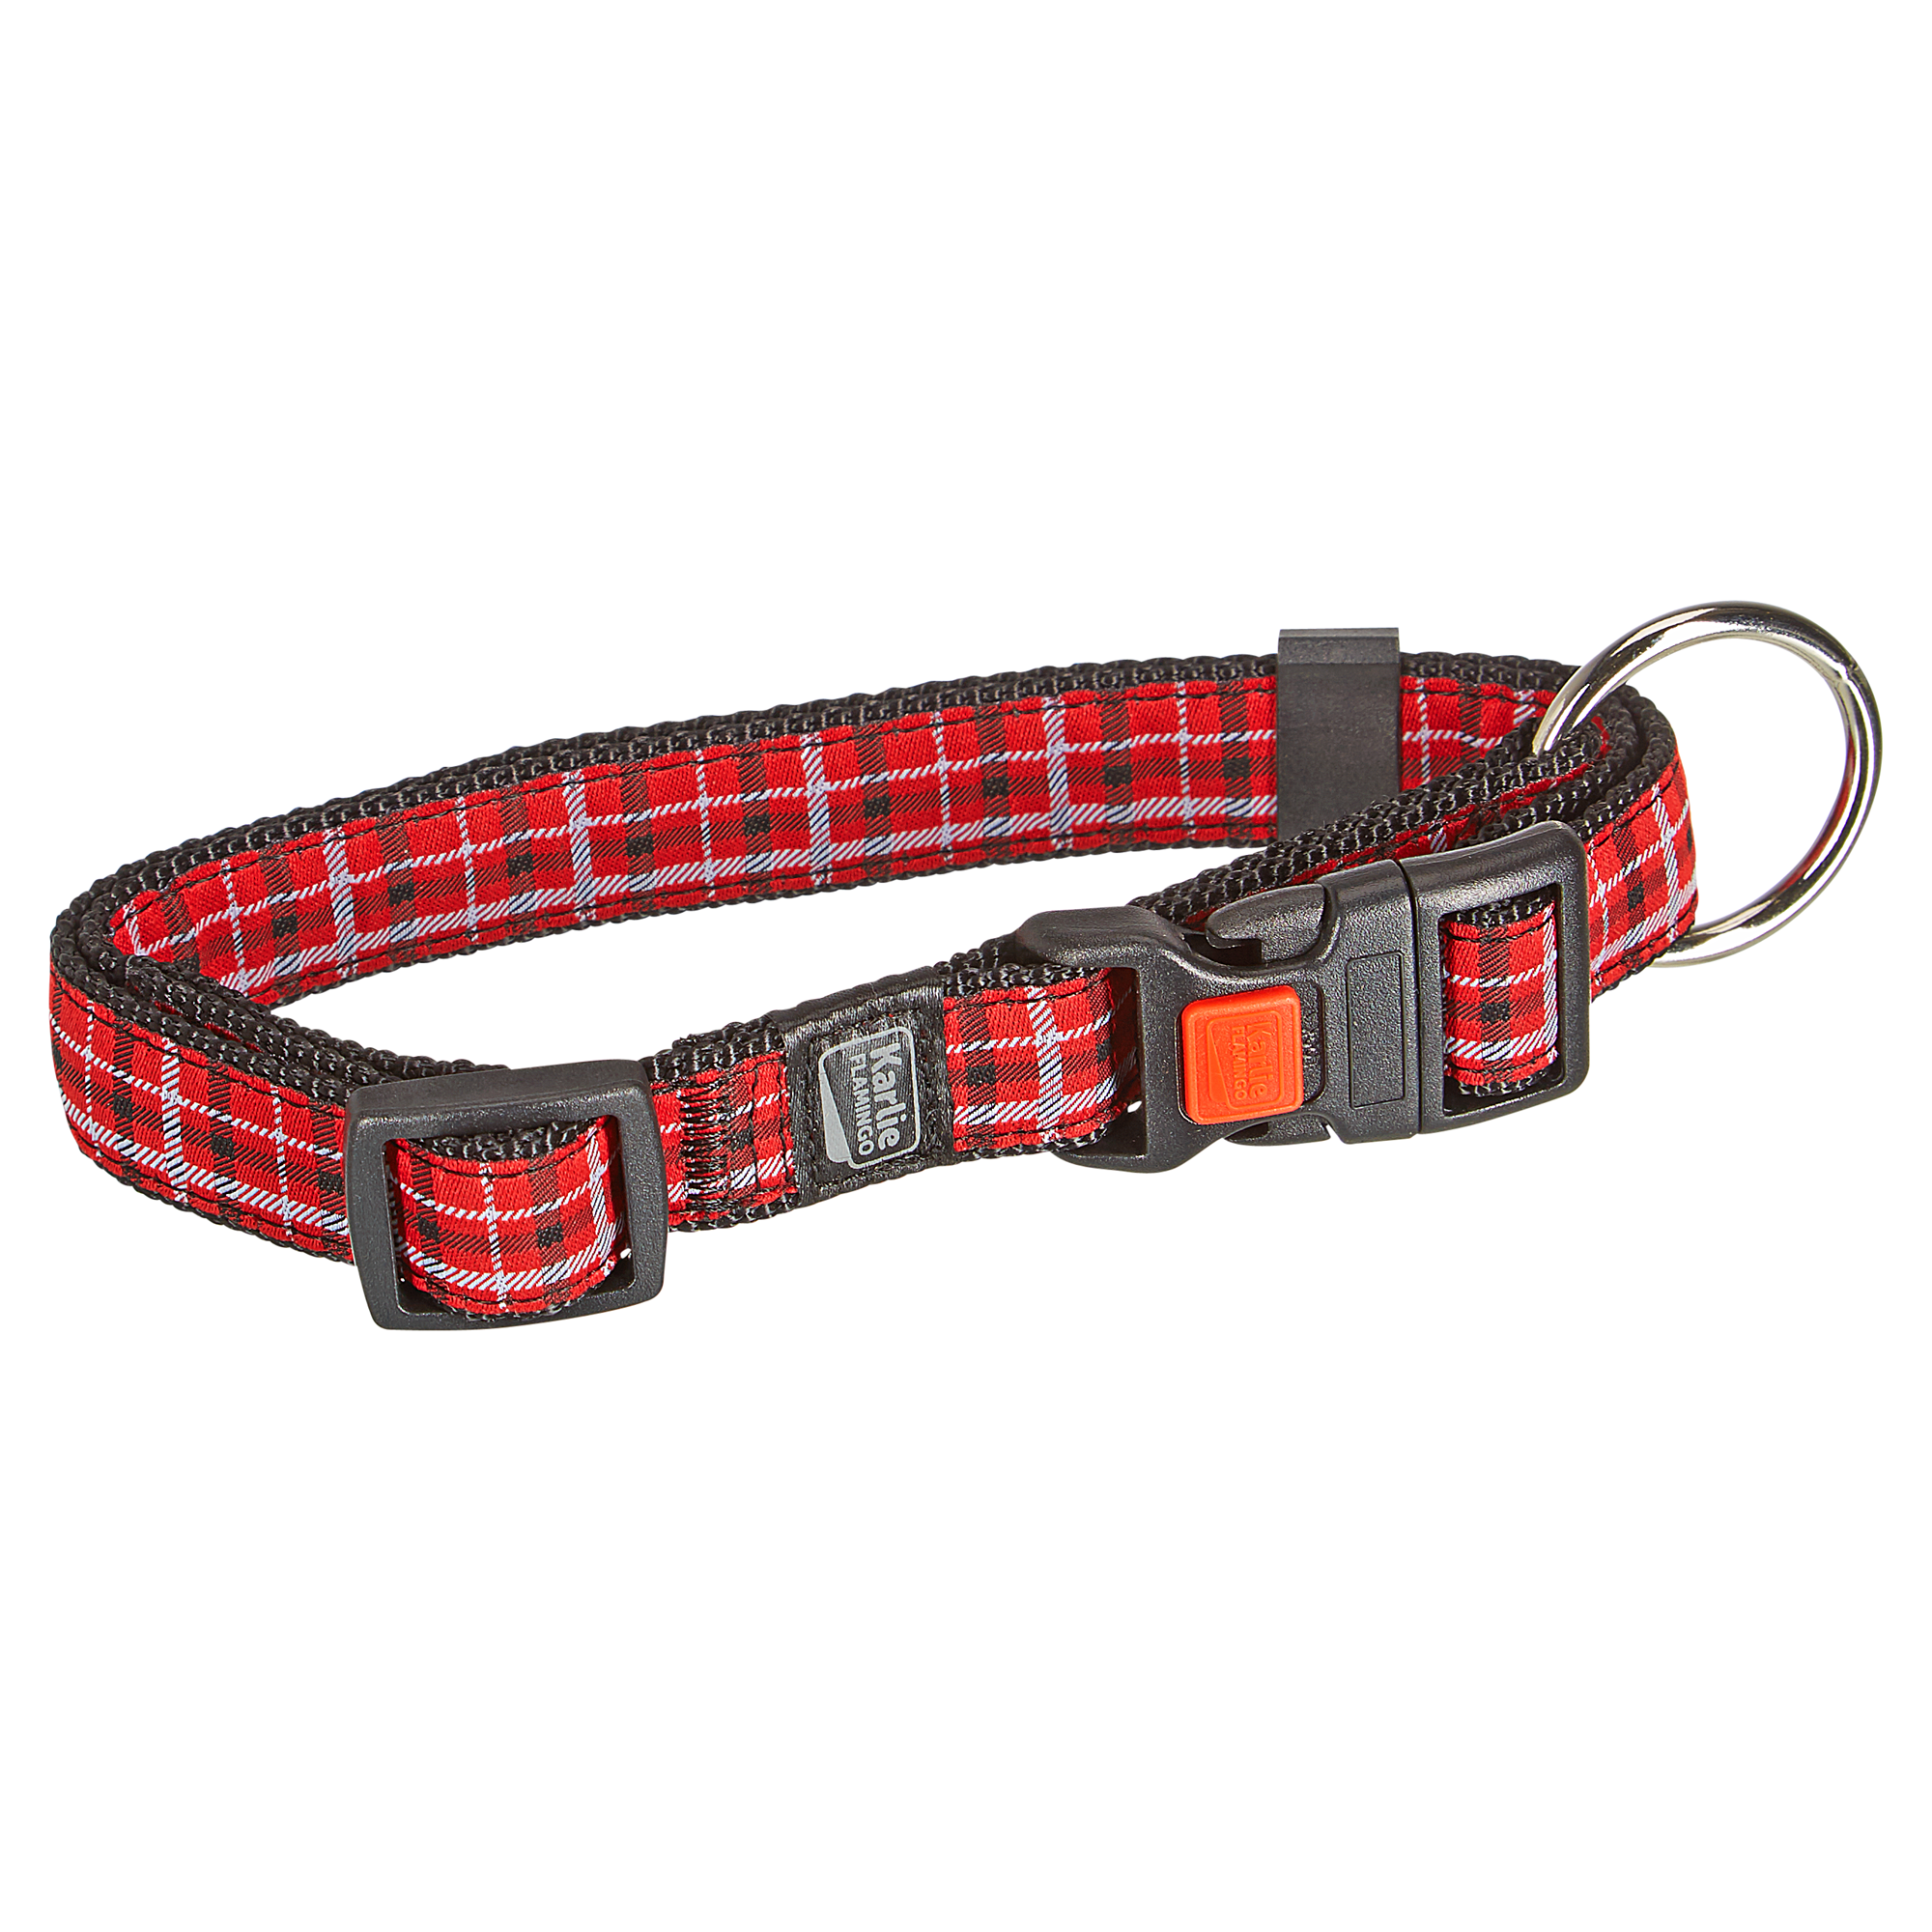 Hundehalsband "Tartan" 45 - 55 x 2 cm Gr. M + product picture